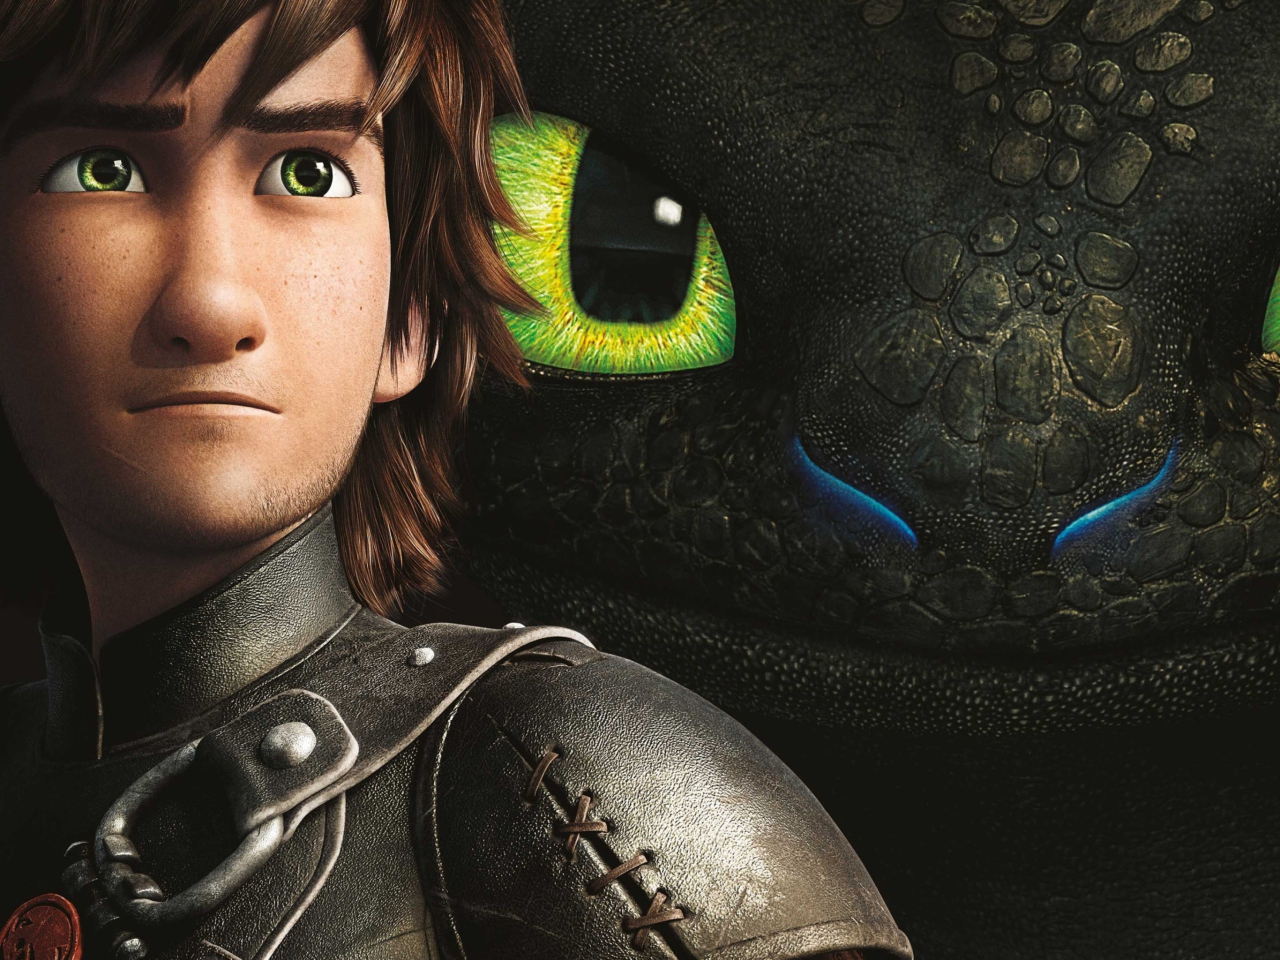 How To Train Your Dragon wallpaper 1280x960